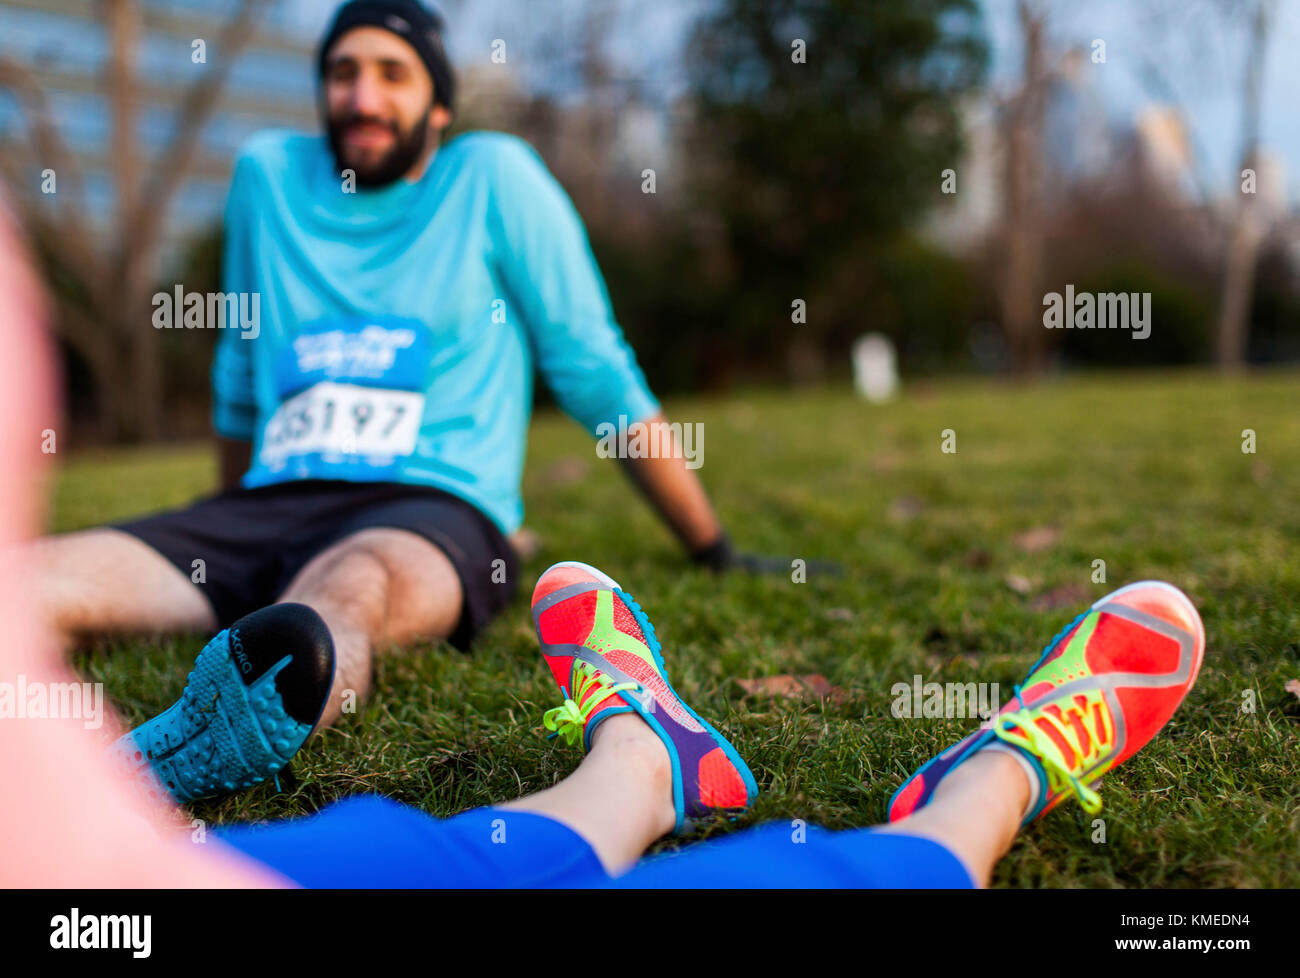 A view of a runner from the point of view of another resting in the grass in Seattle, WA. Stock Photo